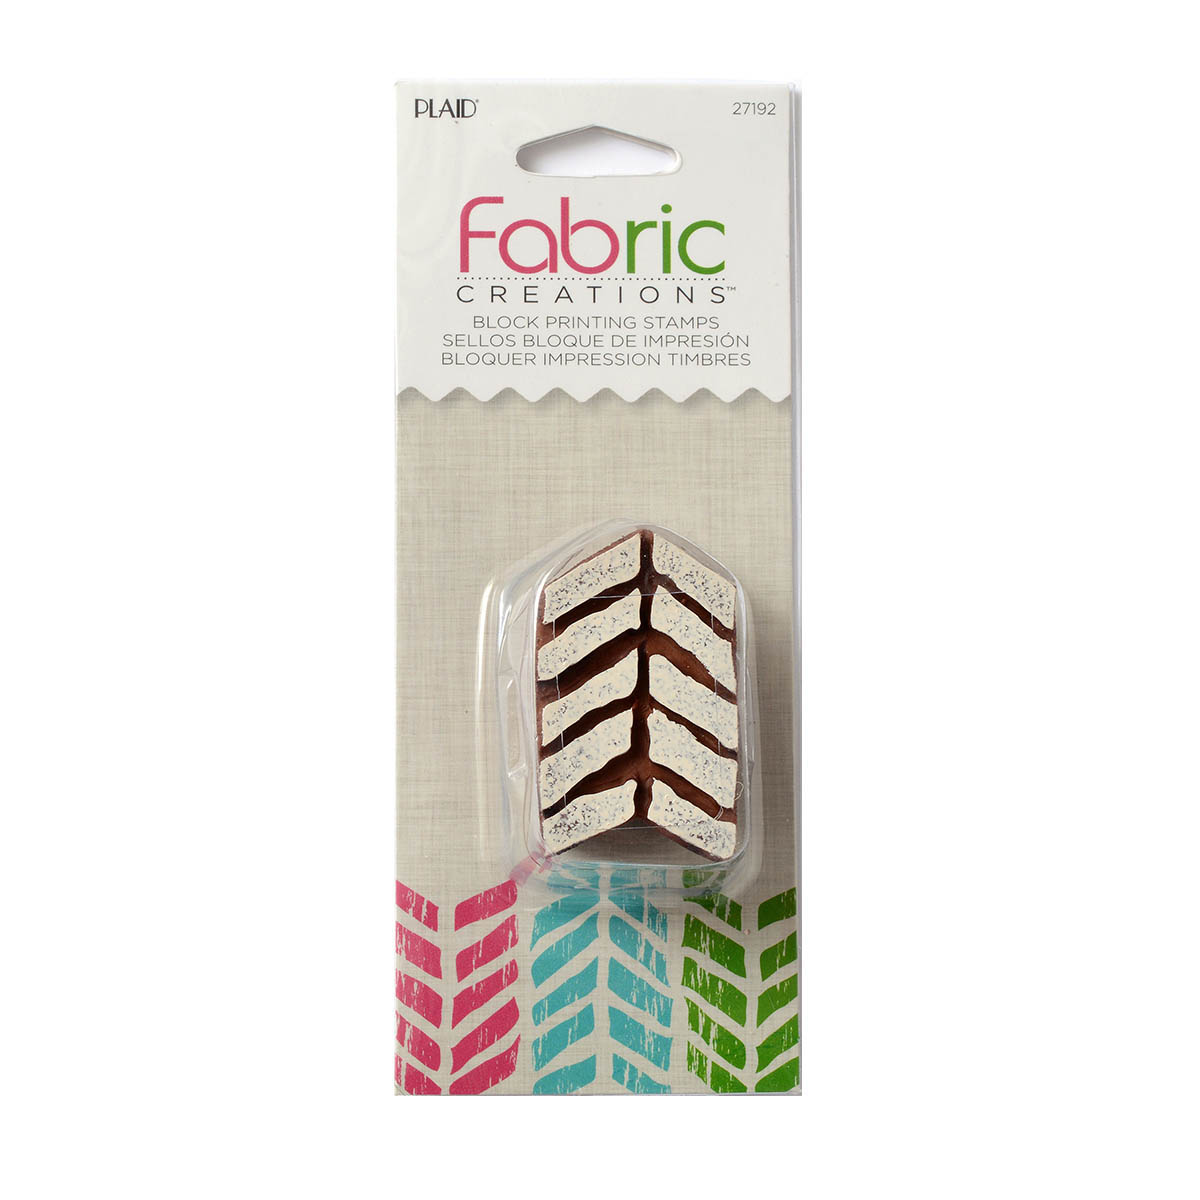 Fabric Creations™ Block Printing Stamps - Small - Tribal Chevron - 27192